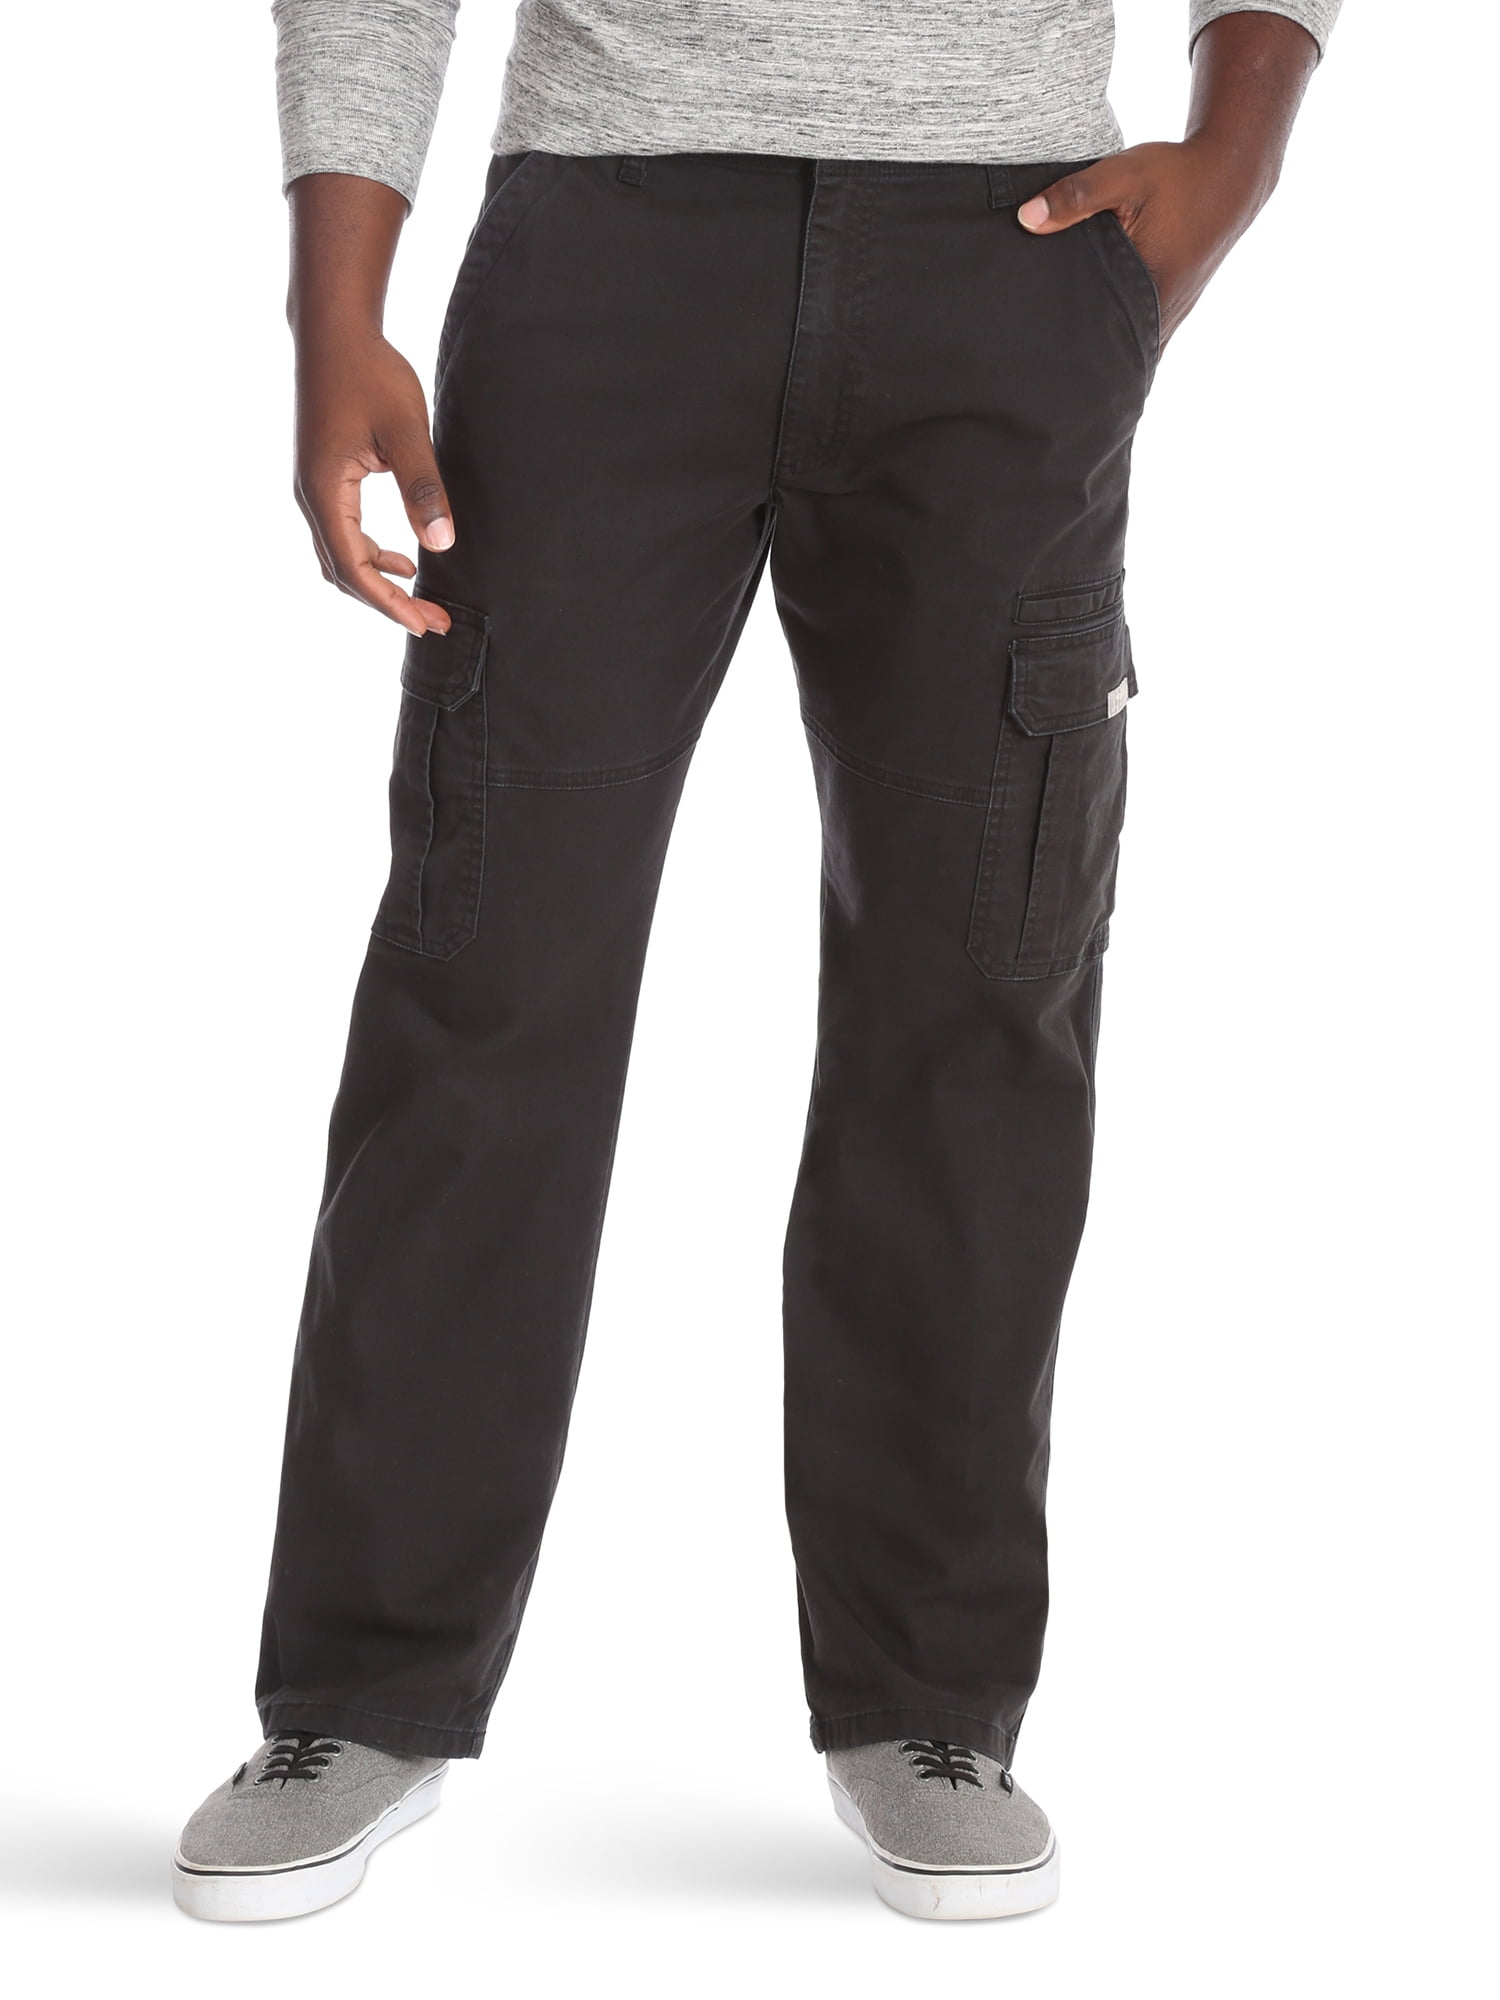 Wrangler Men s and Big Men s Relaxed Fit Cargo Pants With Stretch df3a725f 7384 4942 b262 10fe413914d6 1.4305f90dd2e7aacb548928420cead955